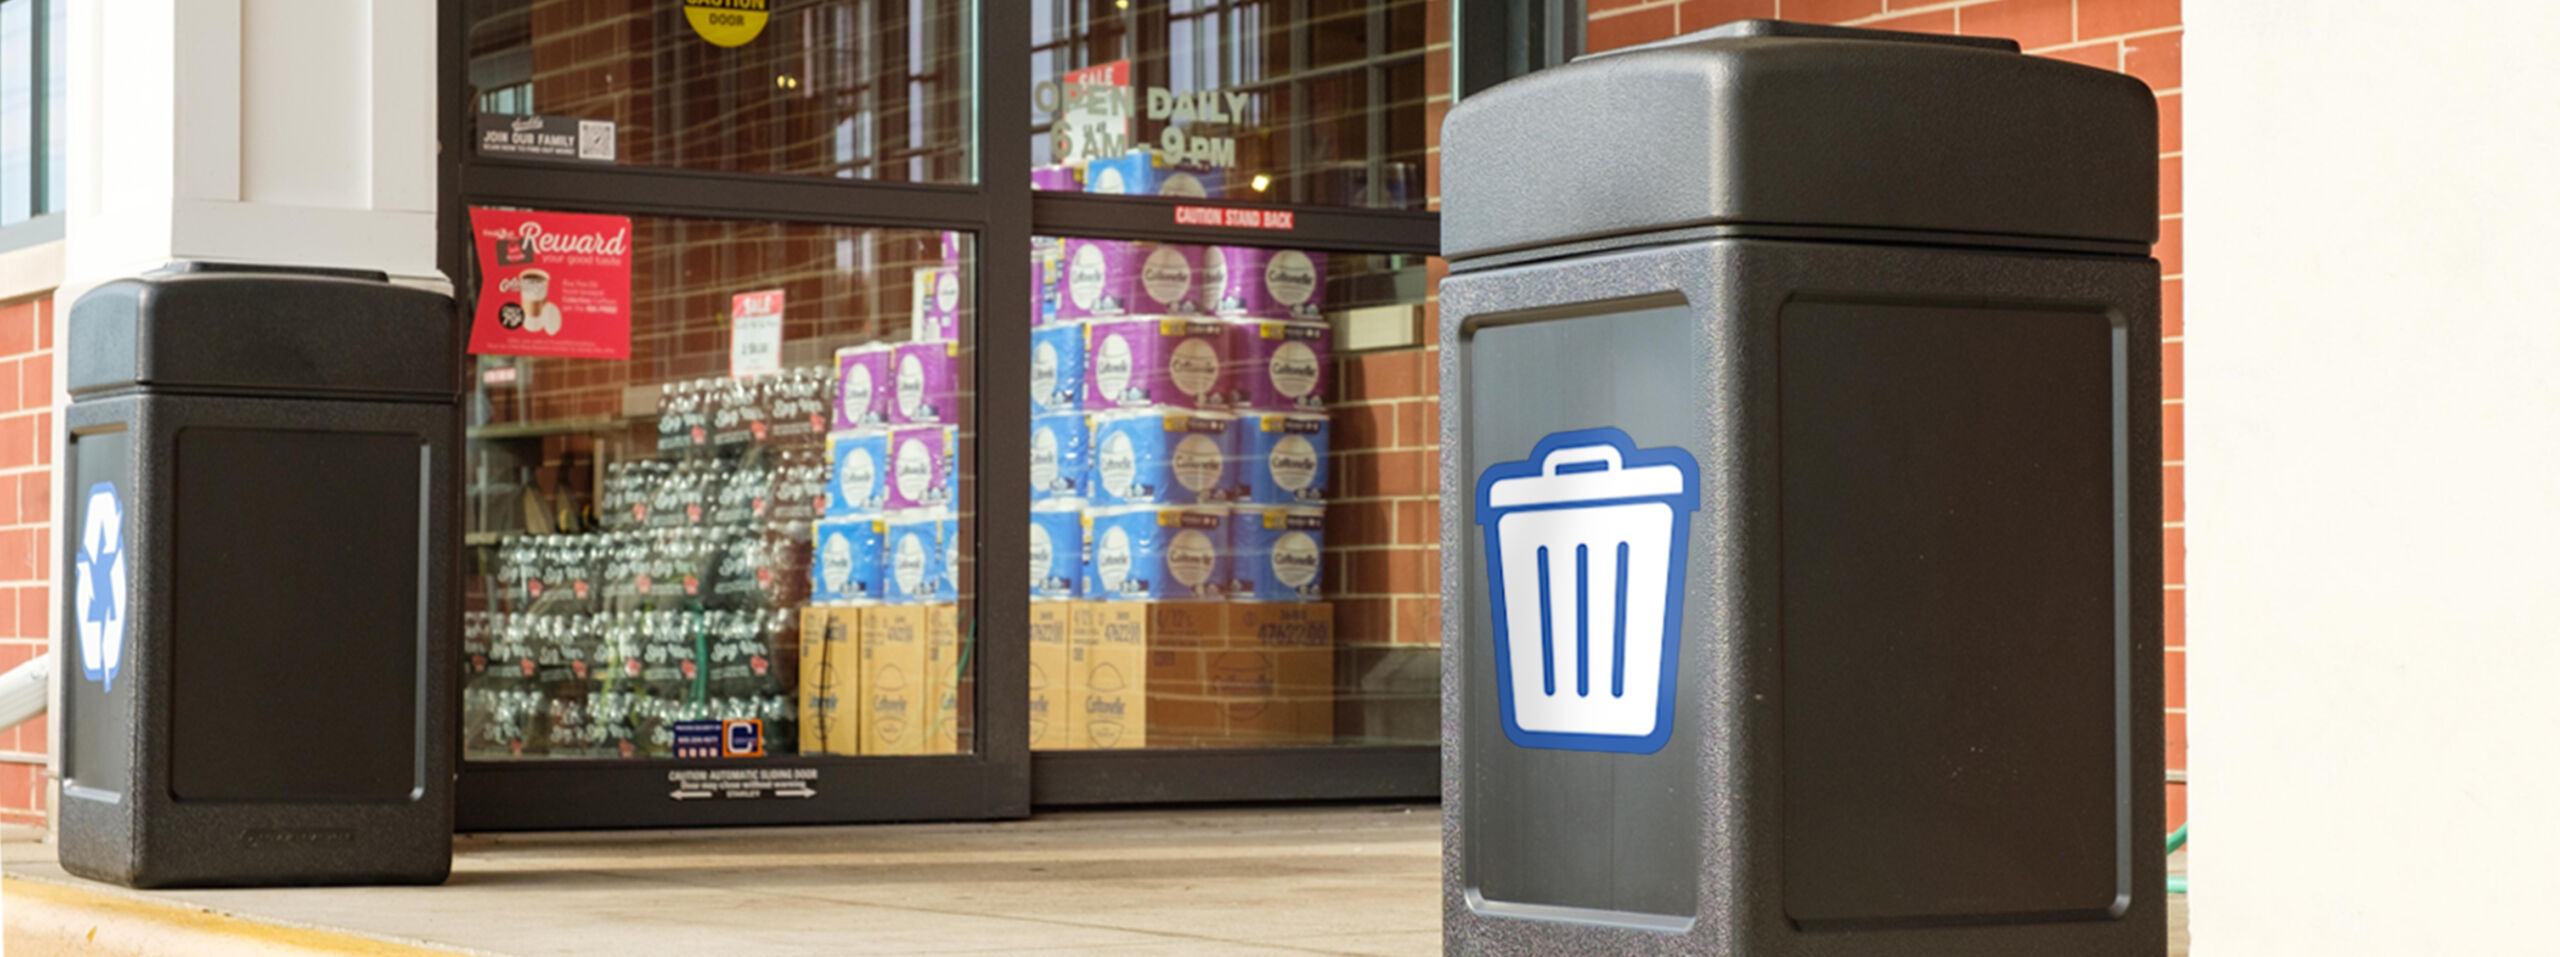 trash and recycling receptacles positioned in front of a convenience store forecourt